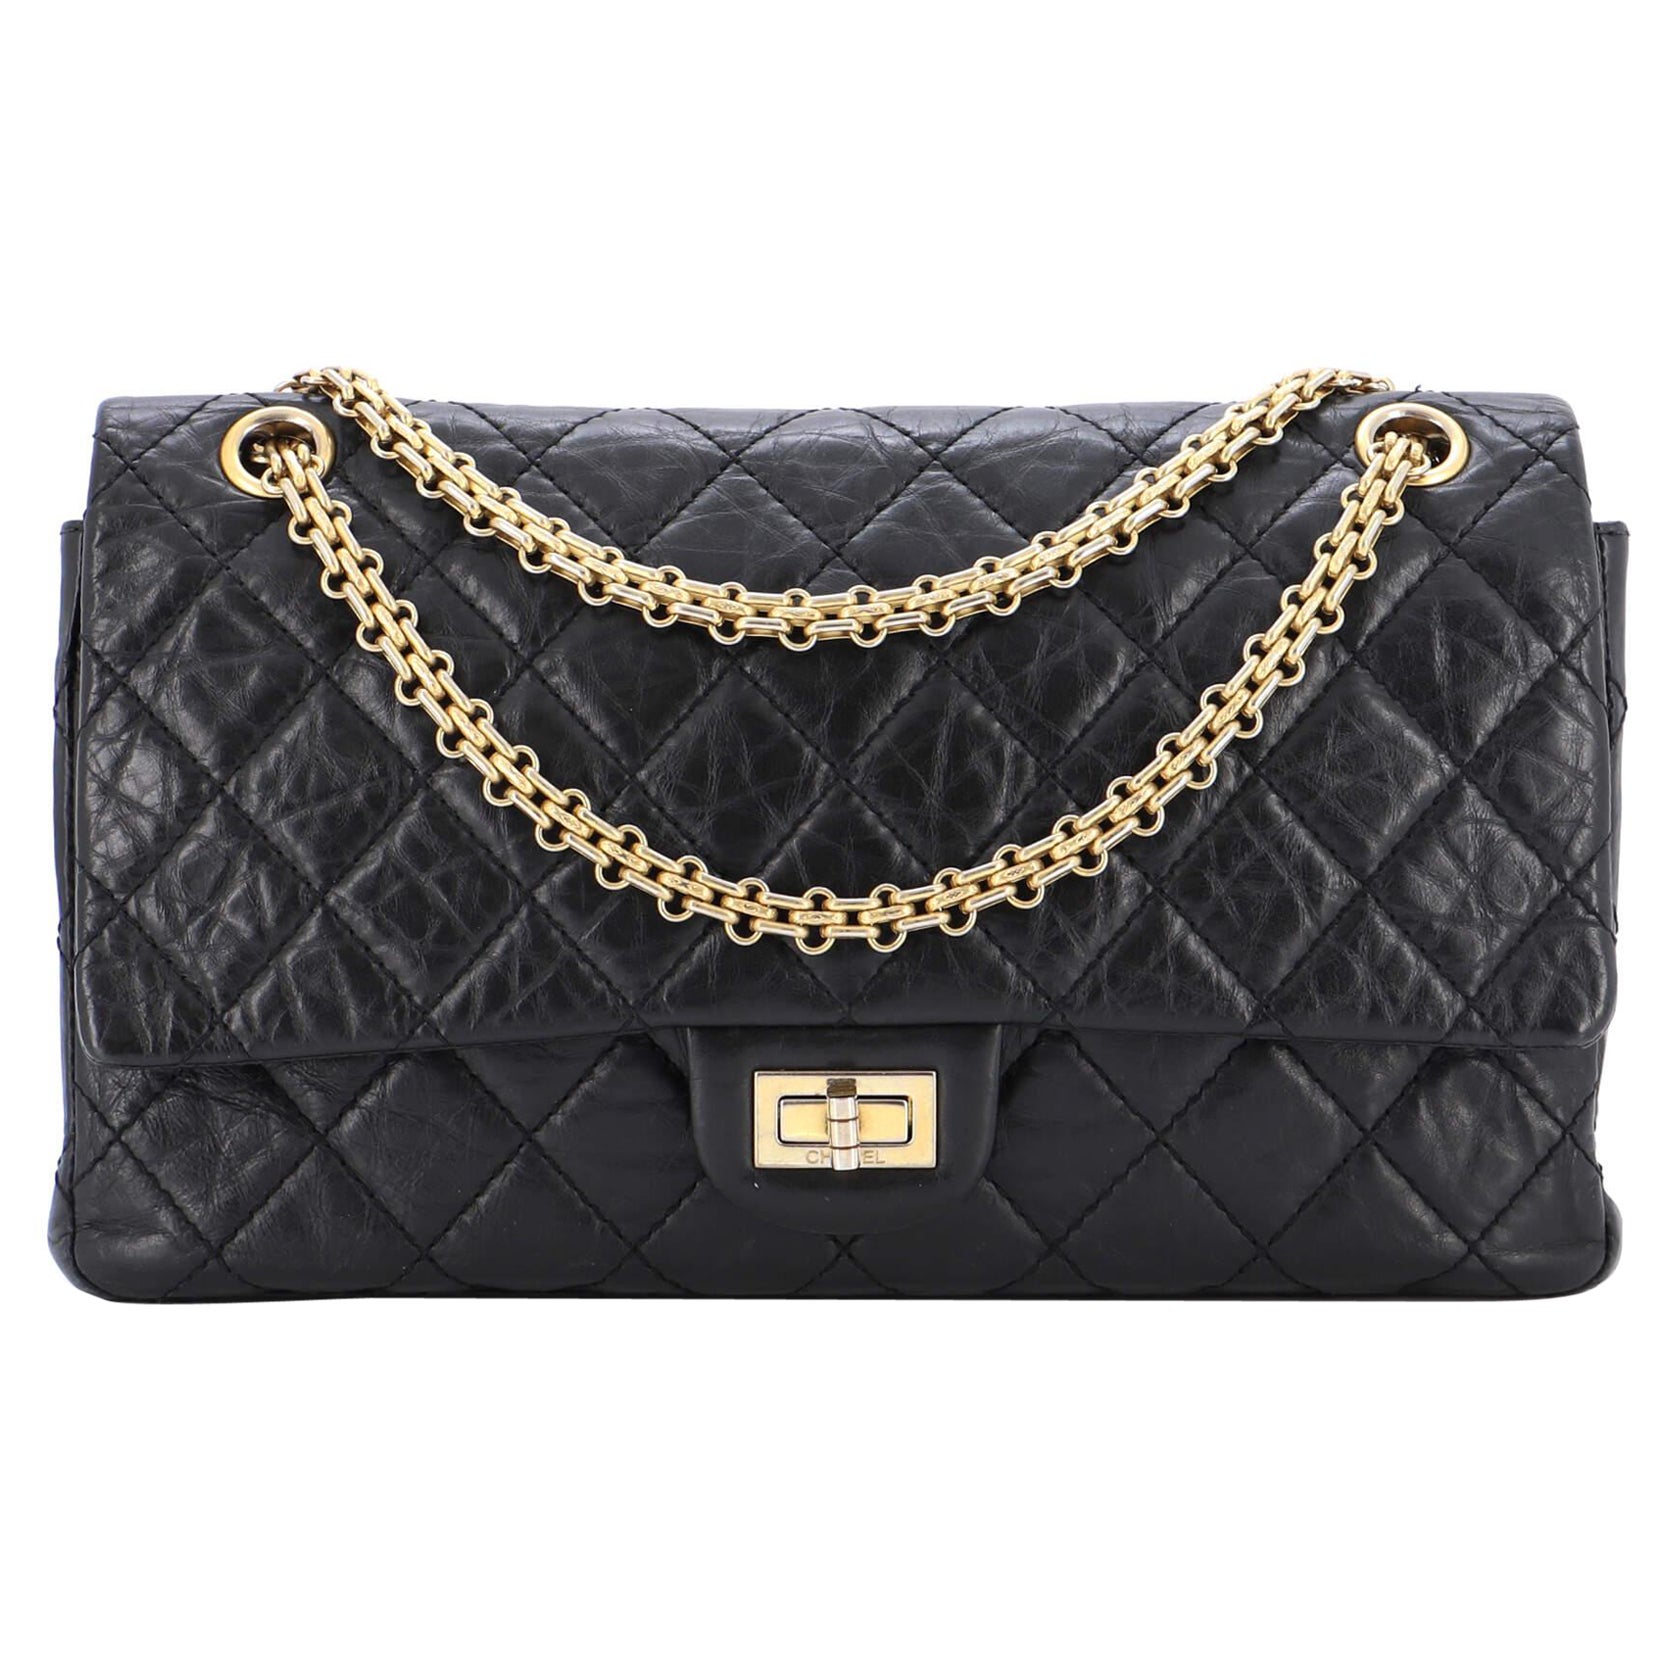 Chanel Lucky Charms Mini Camera Bag Black Aged Calfskin Aged Gold Hardware